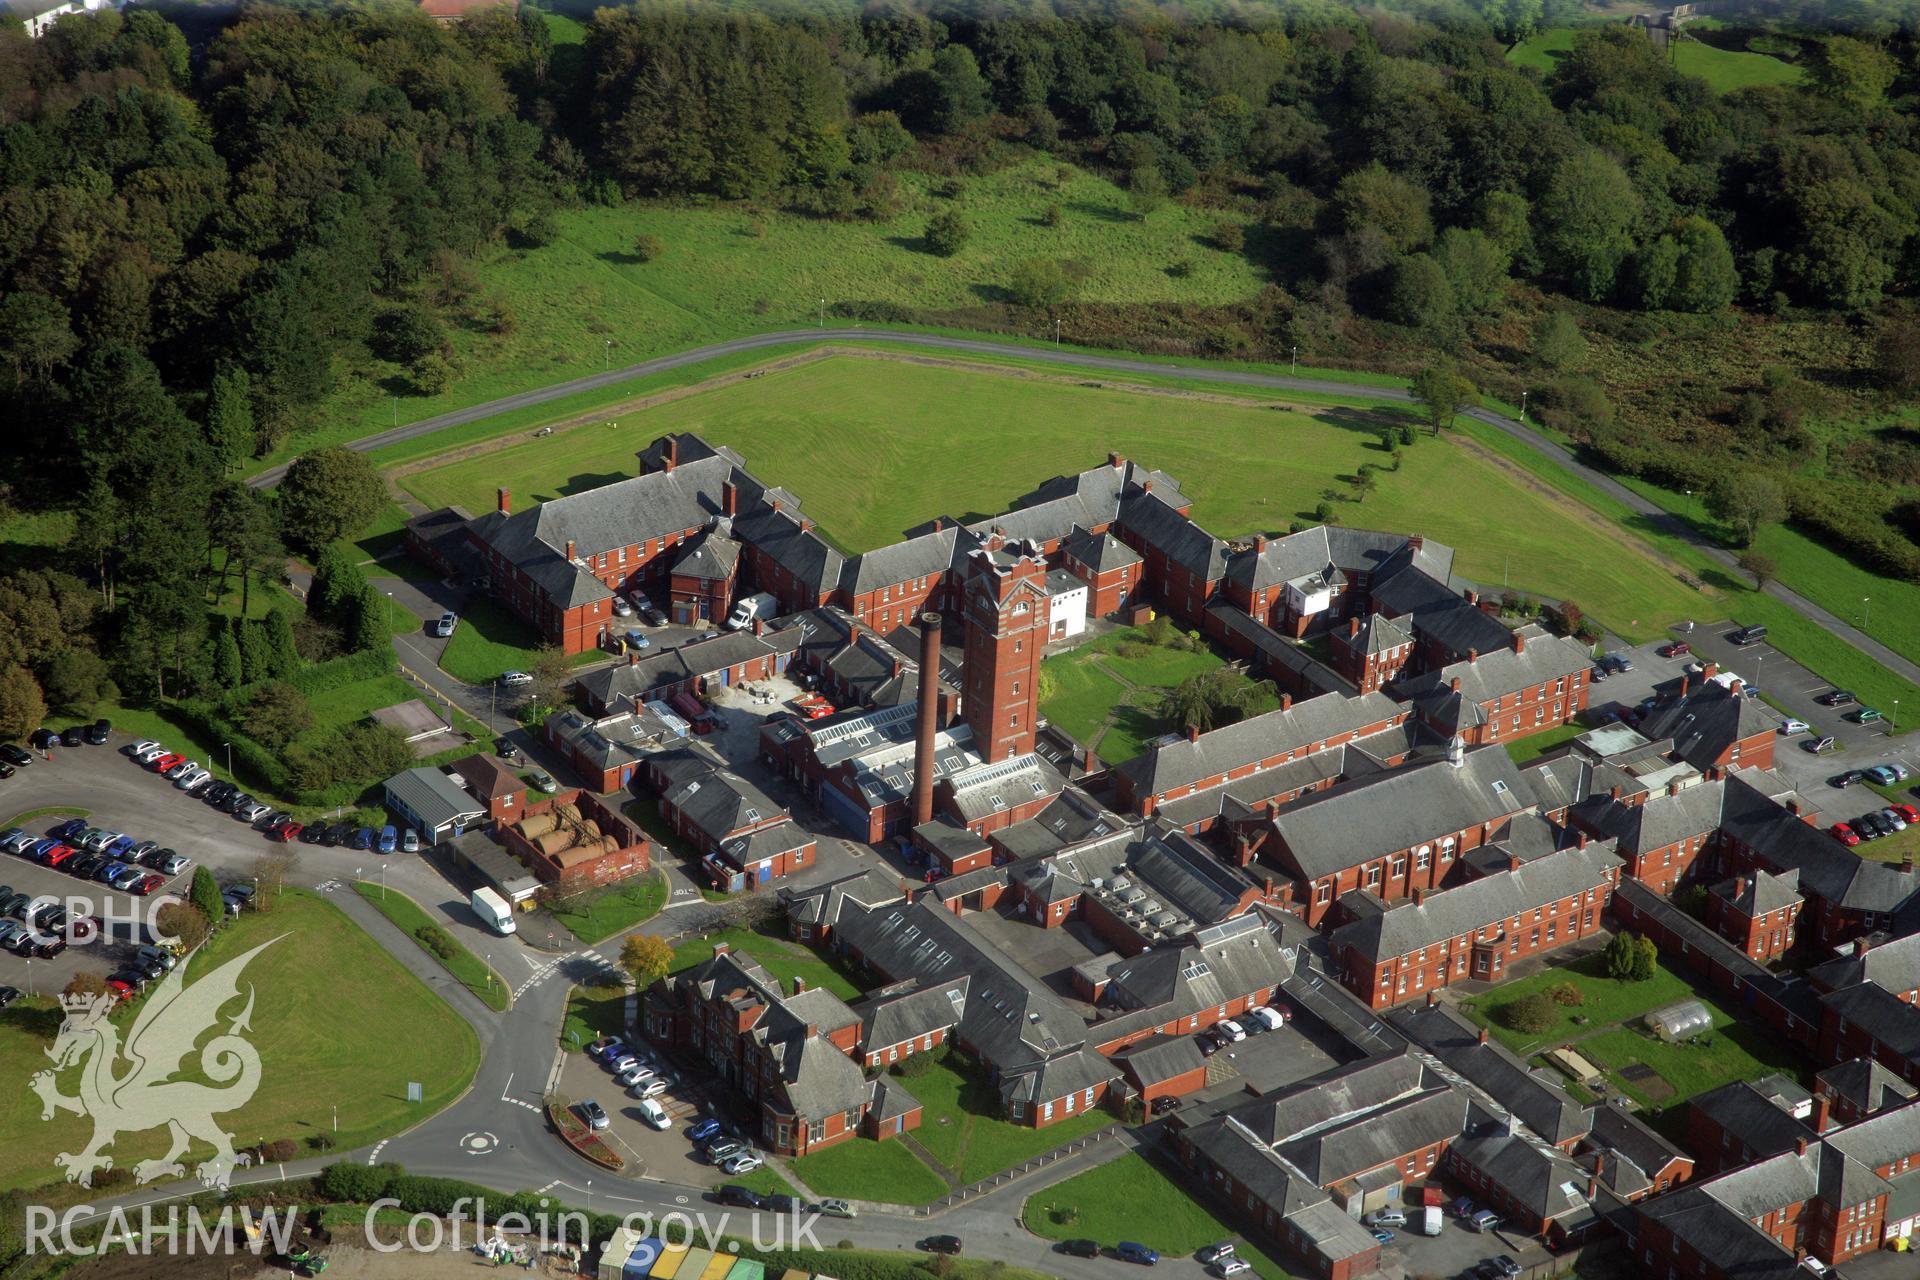 RCAHMW colour oblique photograph of Cefn Coed Hospital. Taken by Toby Driver and Oliver Davies on 28/09/2011.